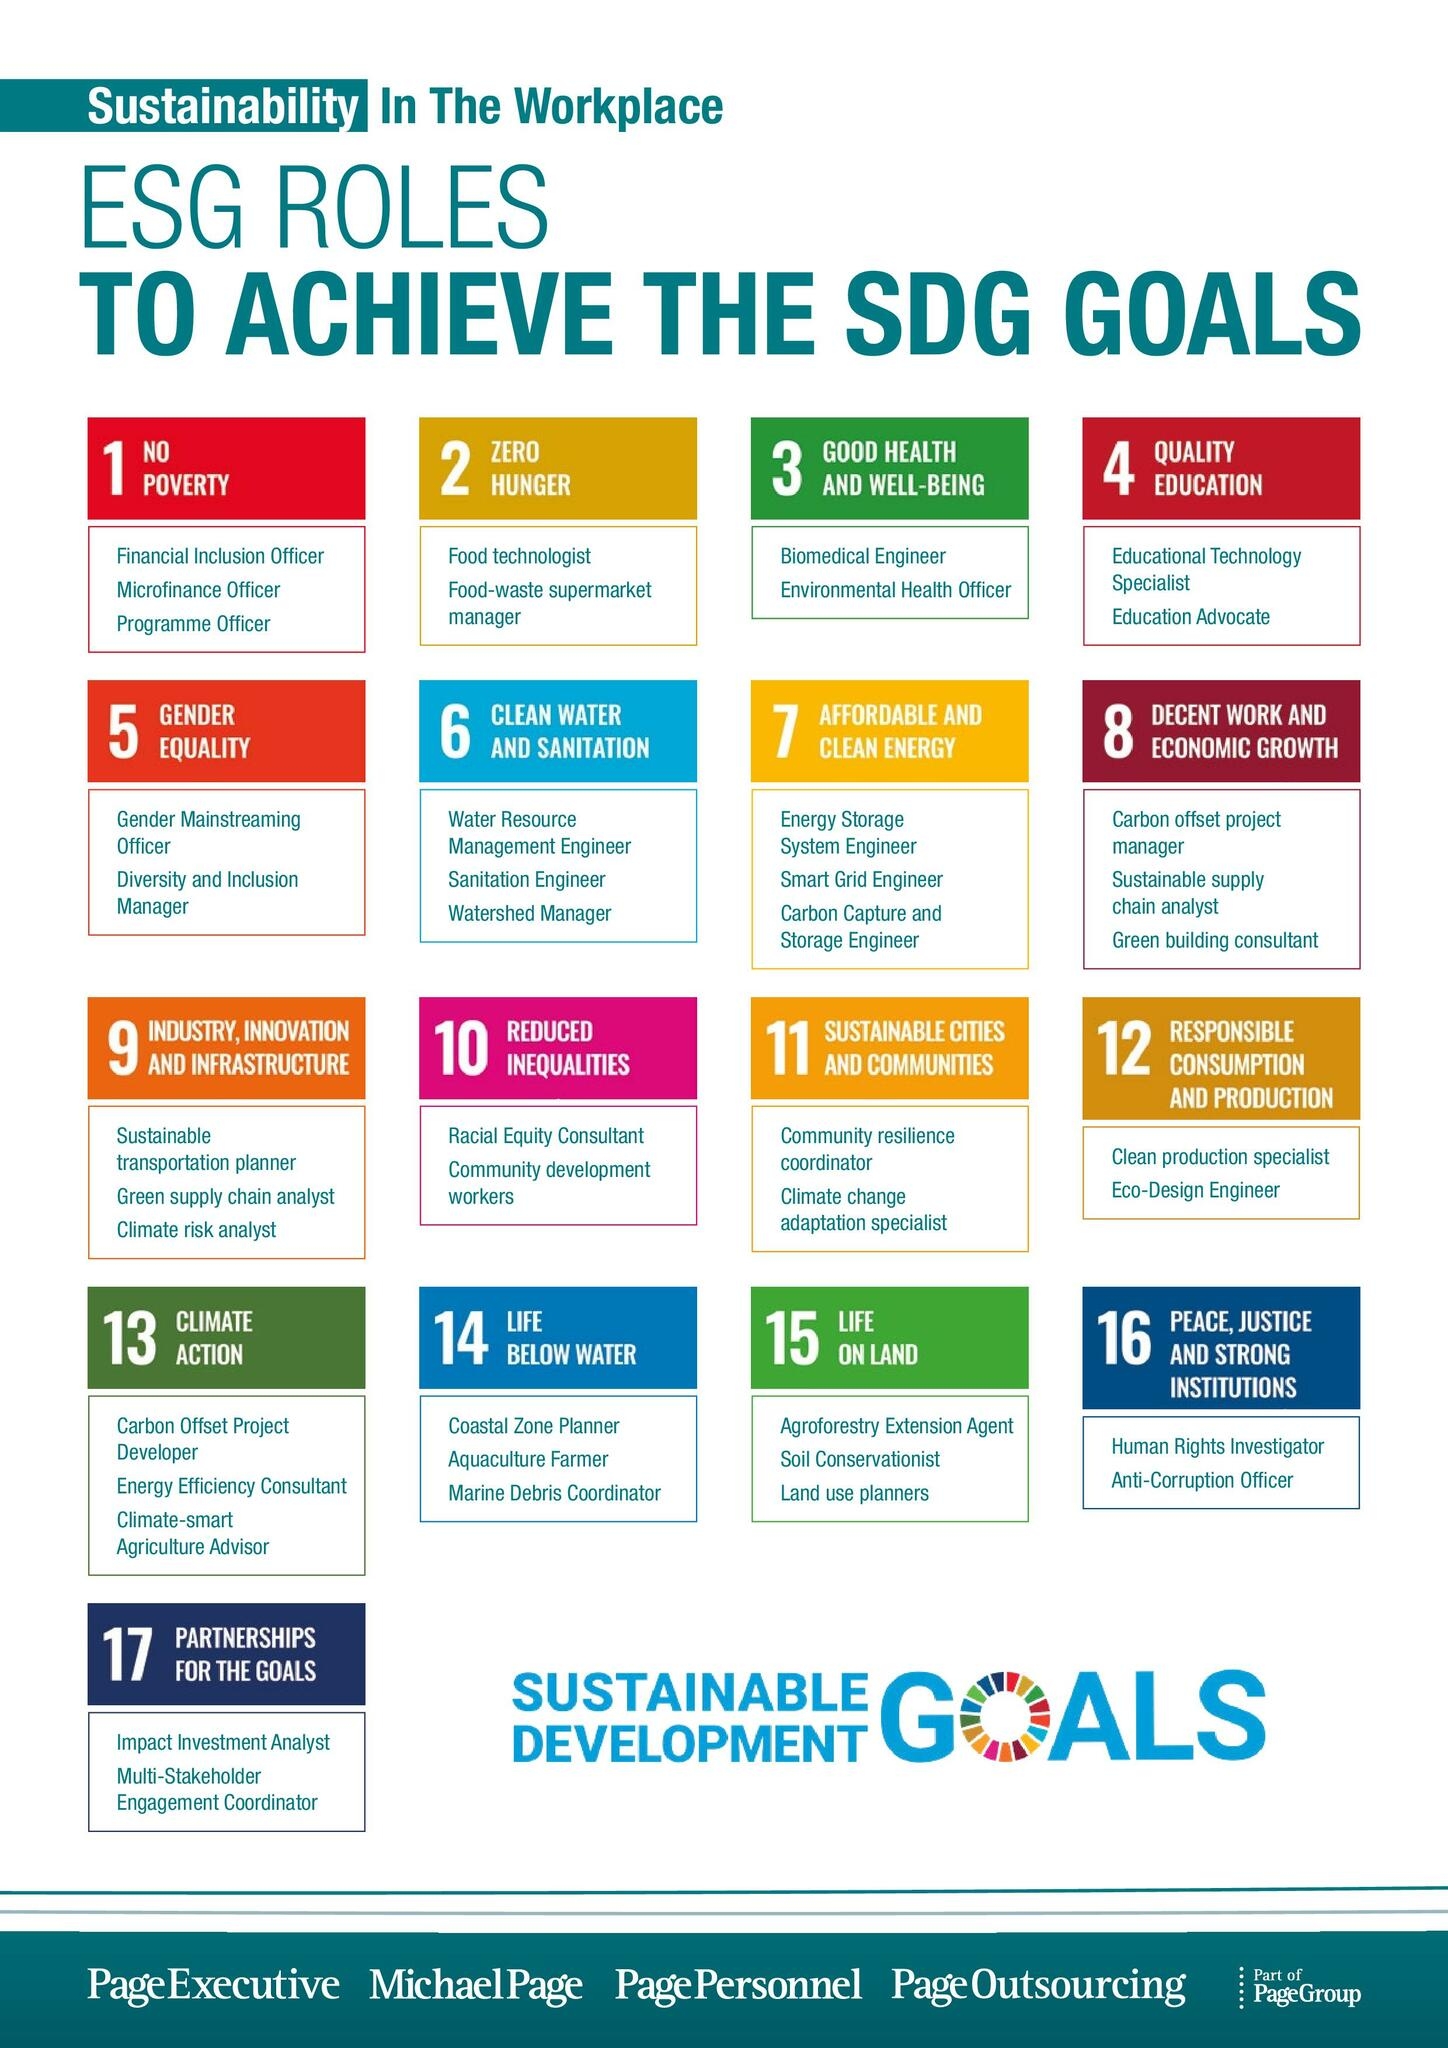 List of ESG roles to help achieve the SDG goals in 2023. 